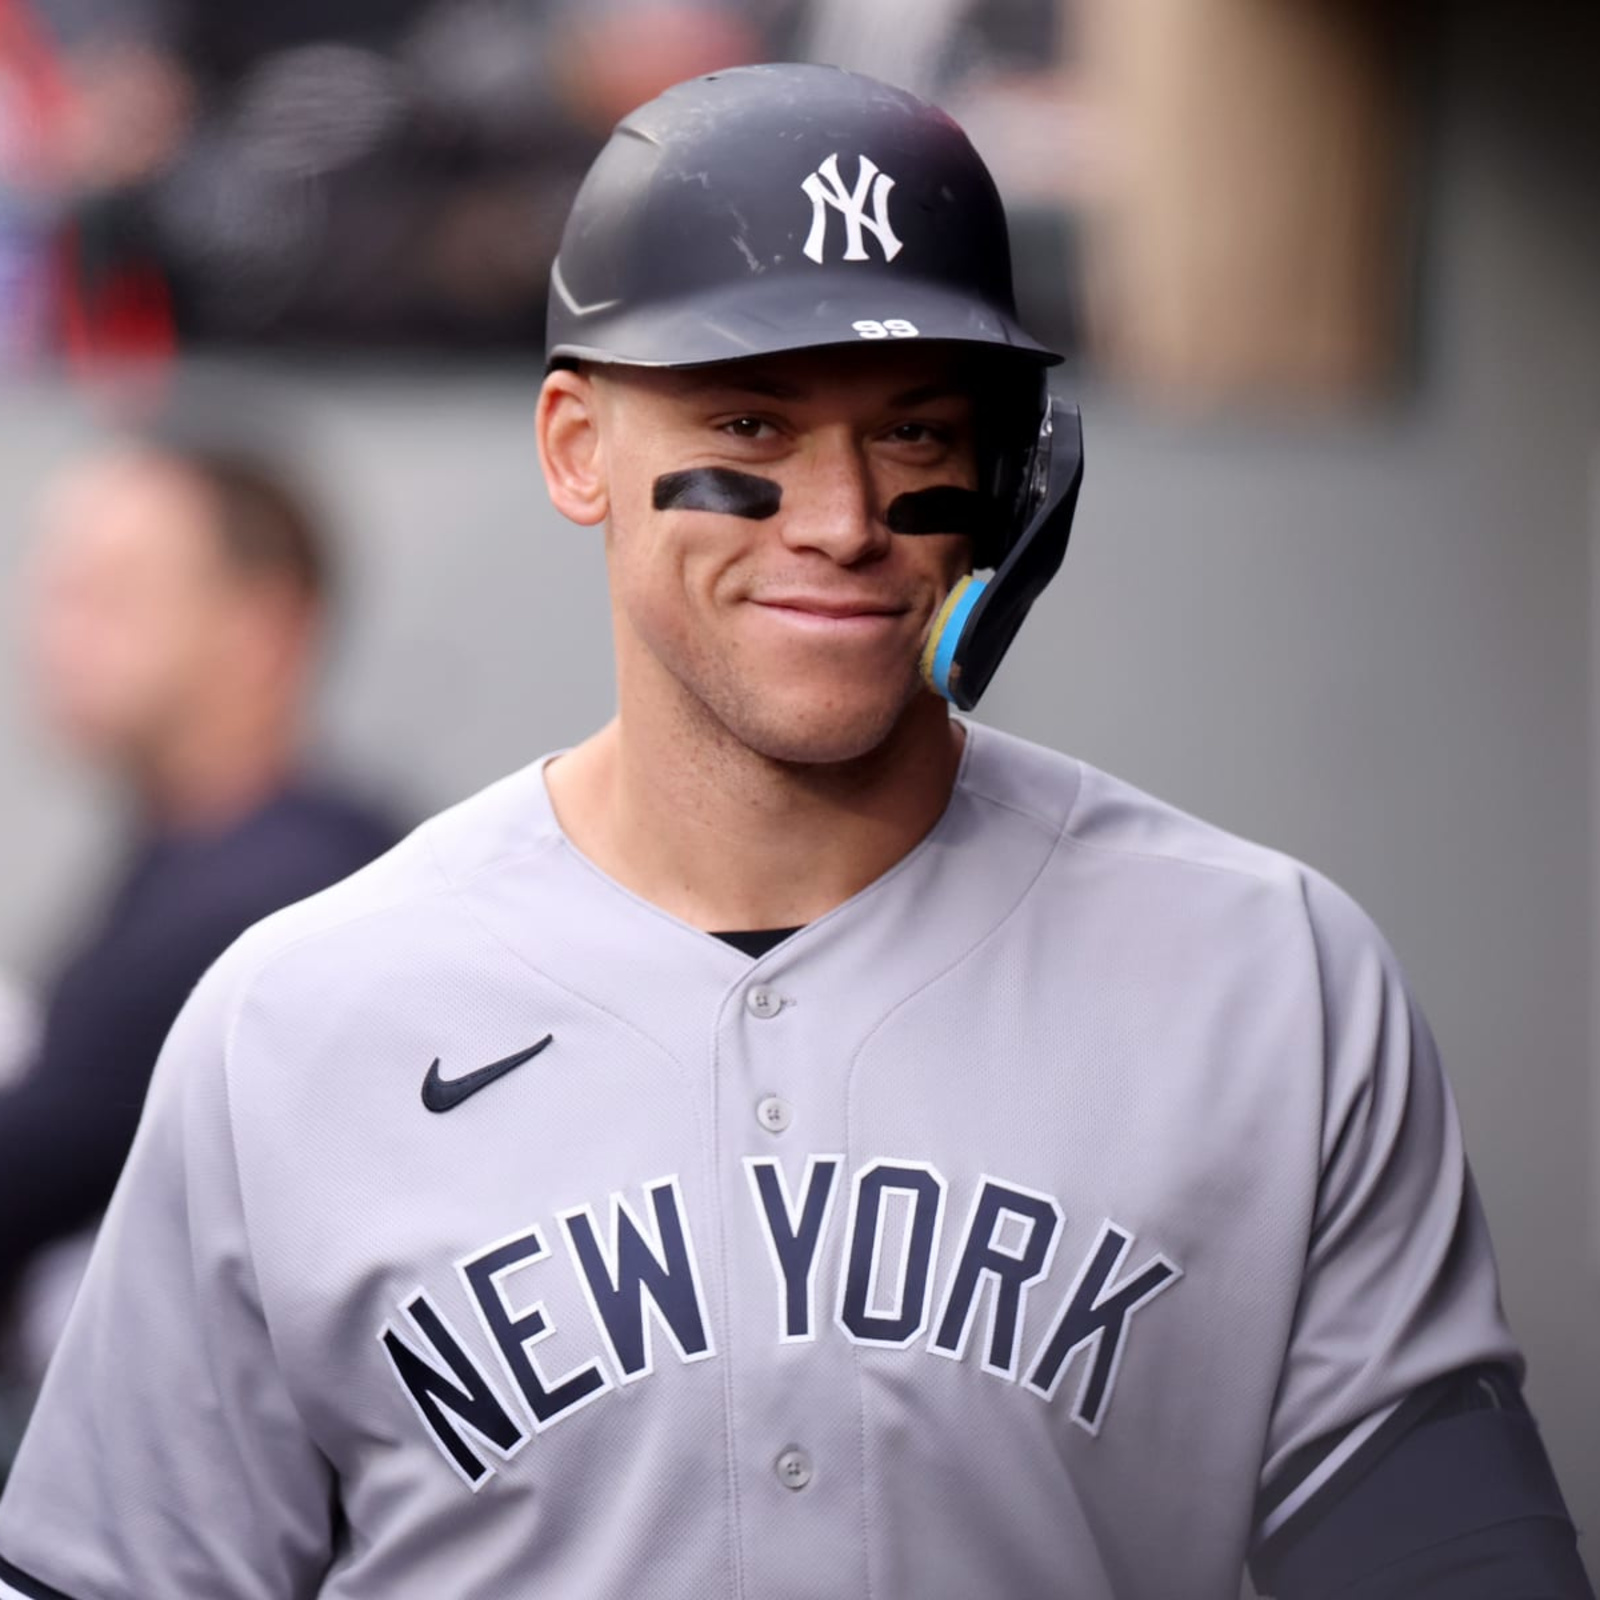 The Yankees first baseman has been a spark for the team